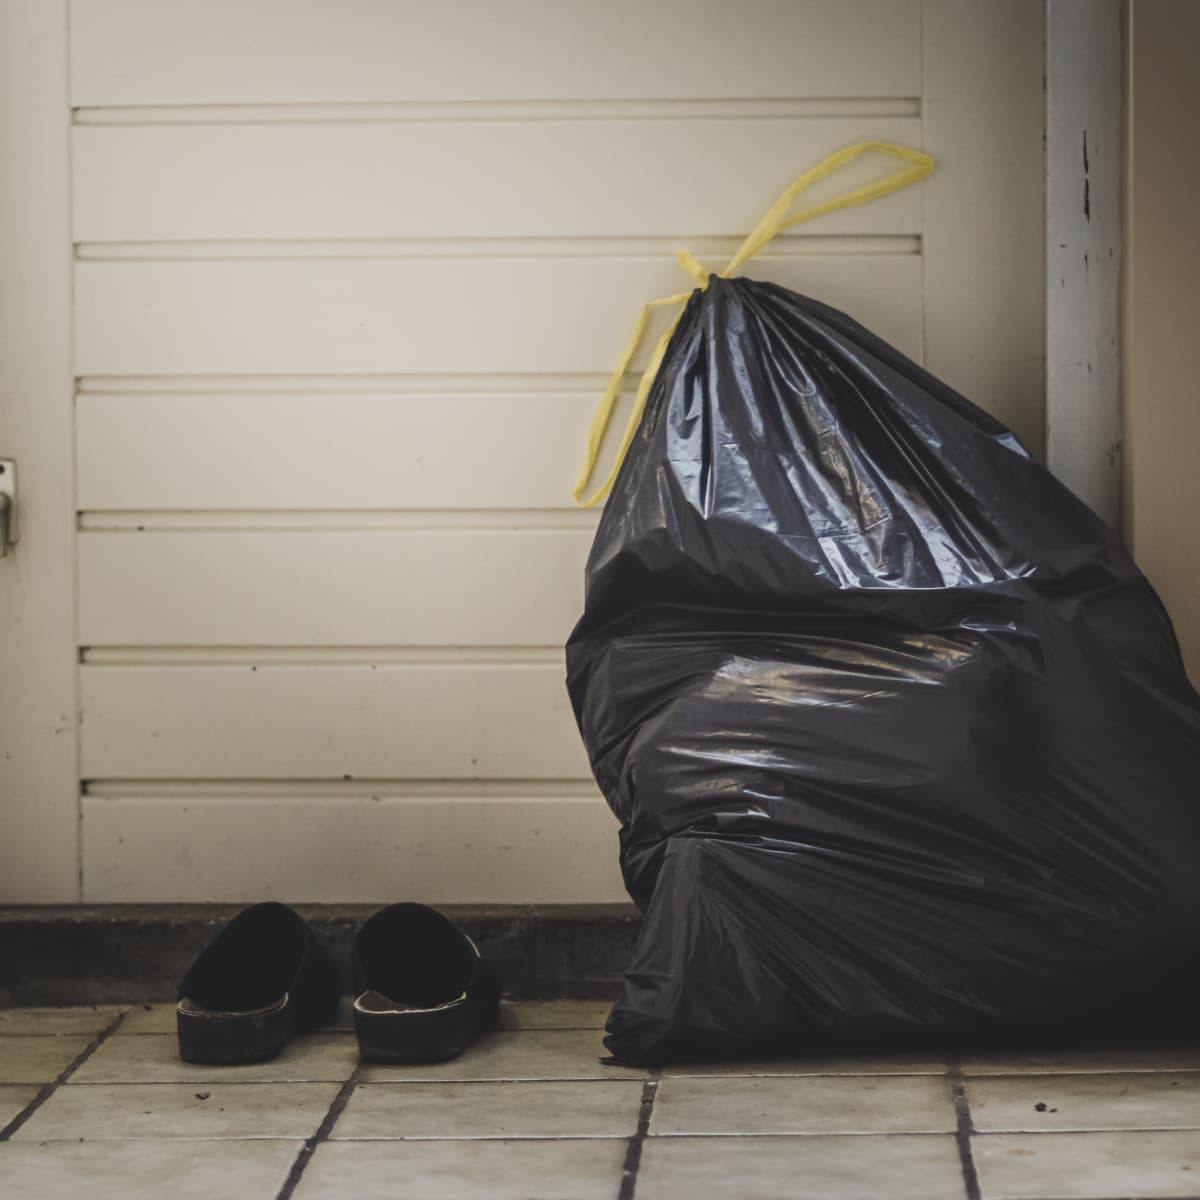 Stuffing a Trash Bag In Your Door Can Help Keep the Cold at Bay - Dengarden  News